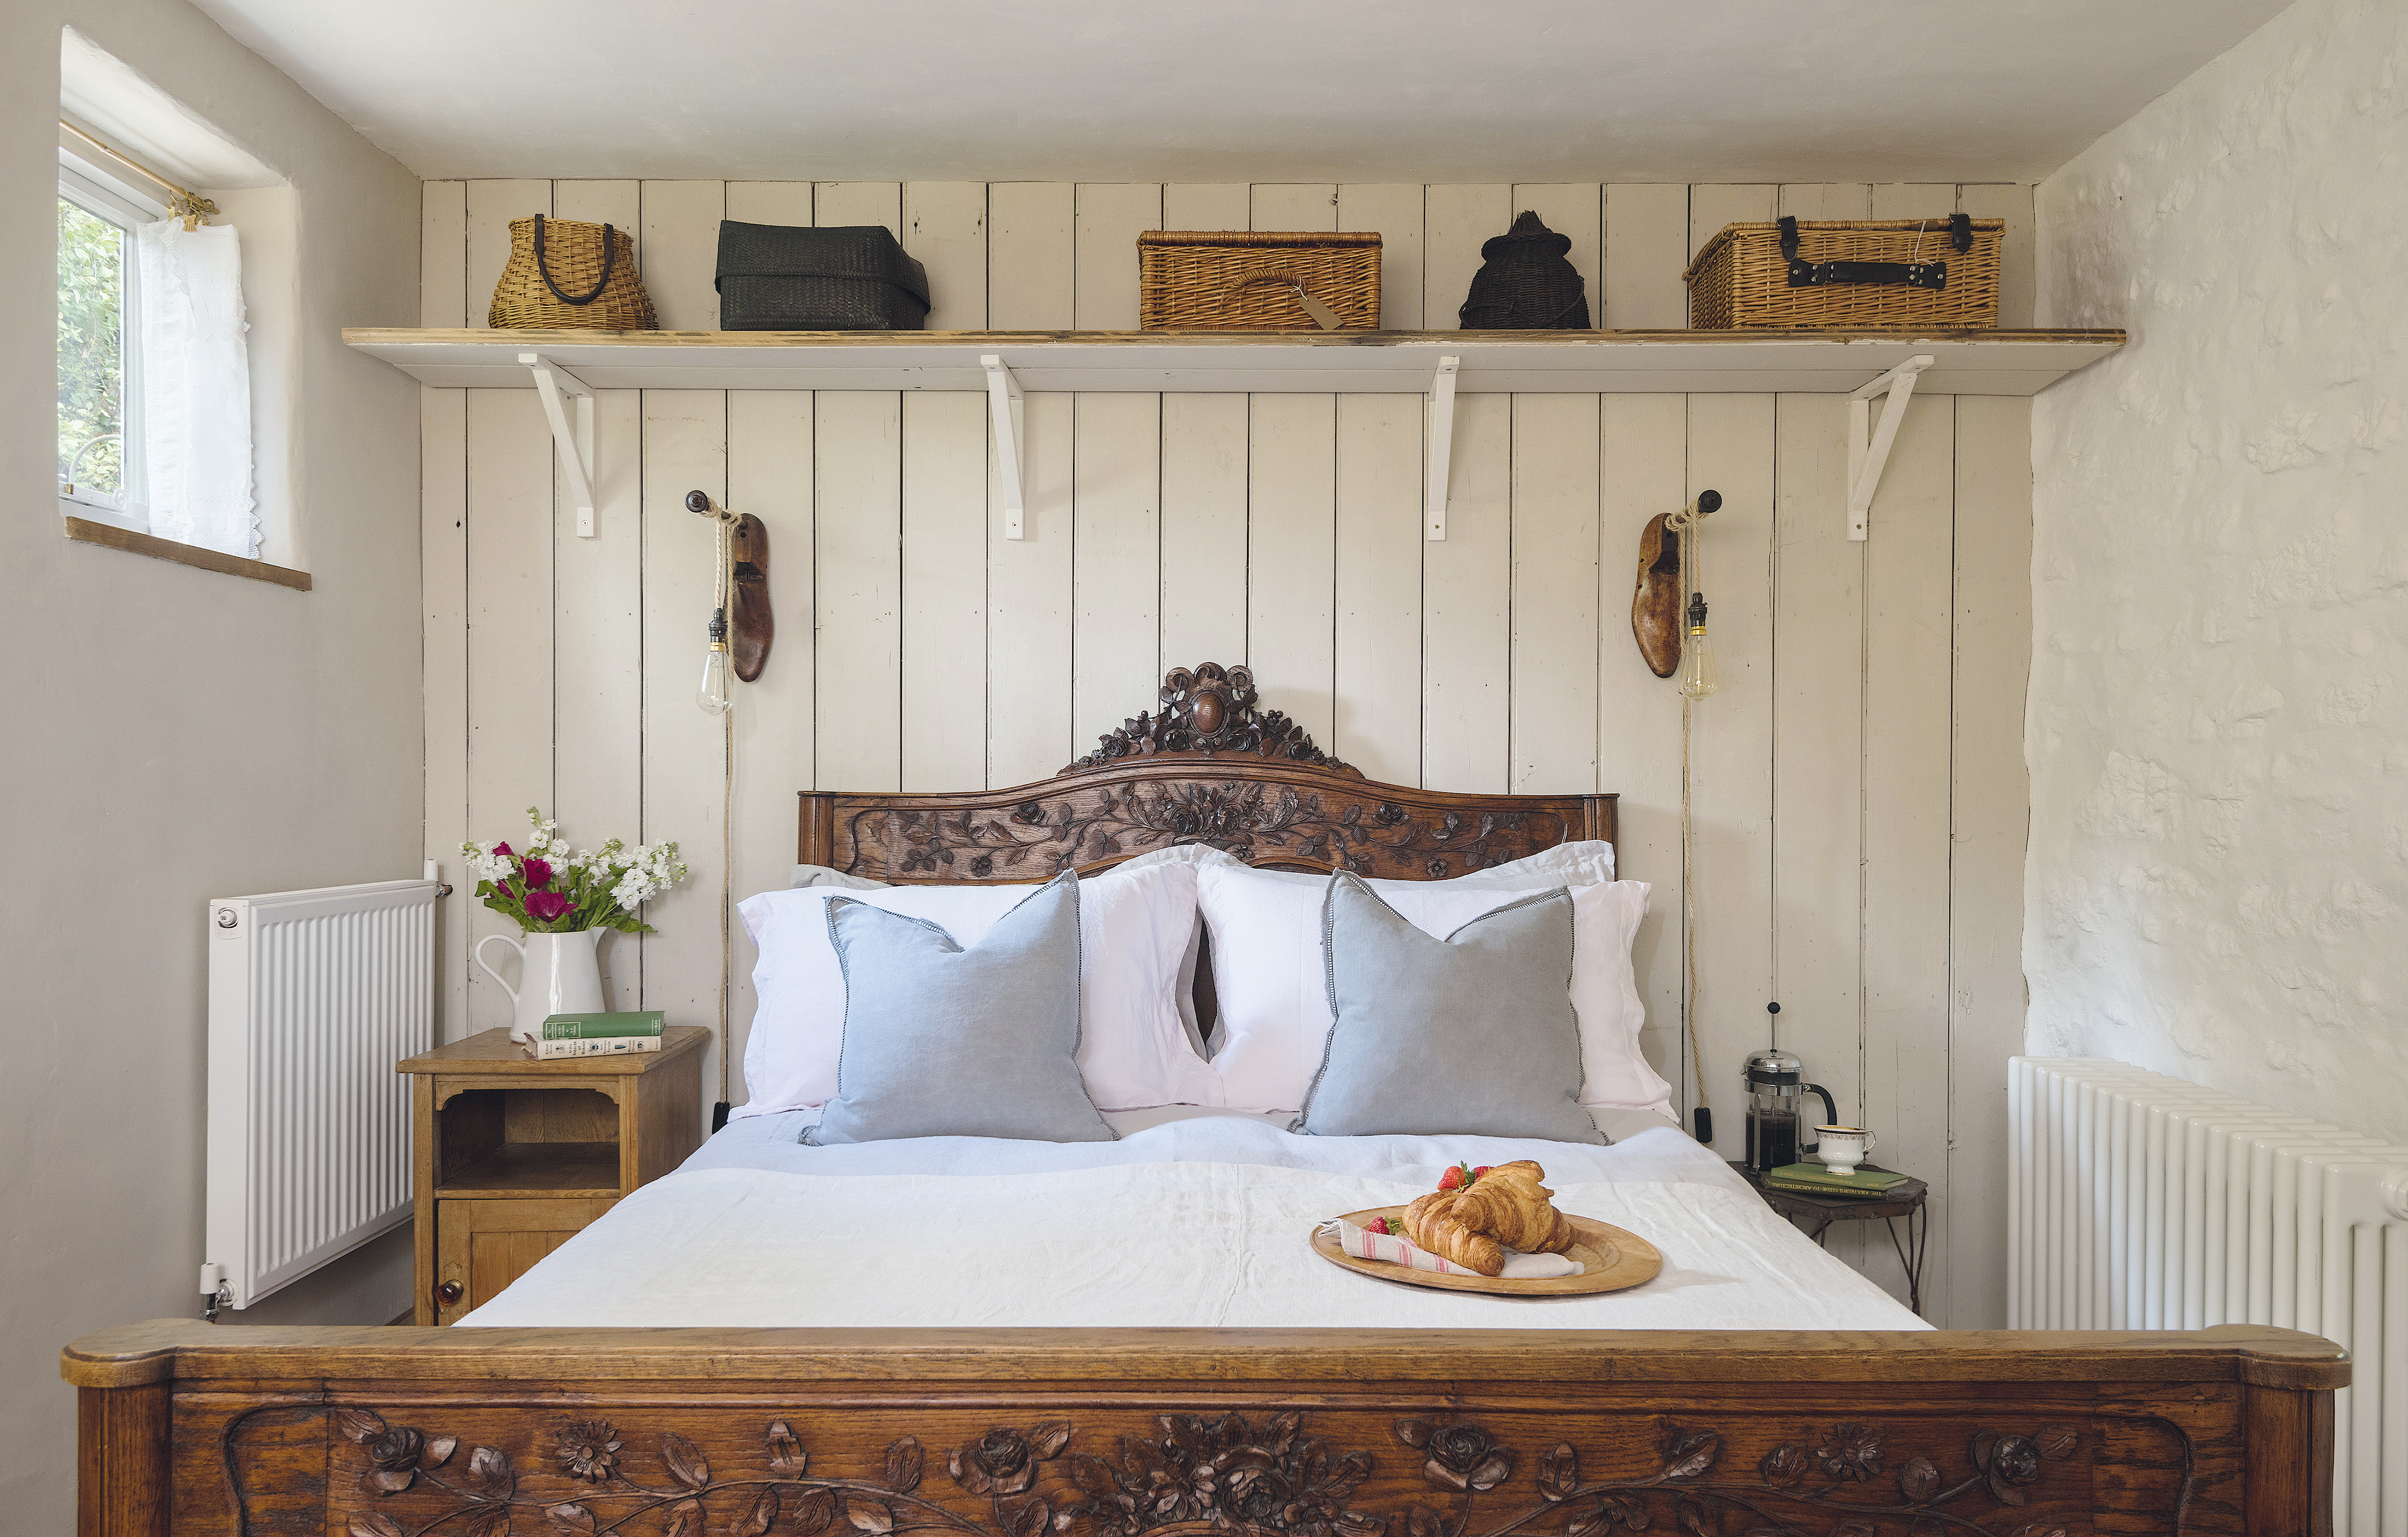 10 Rustic Bedroom Ideas To Make You Feel Like Are Sleeping In A Cozy Cabin Real Homes